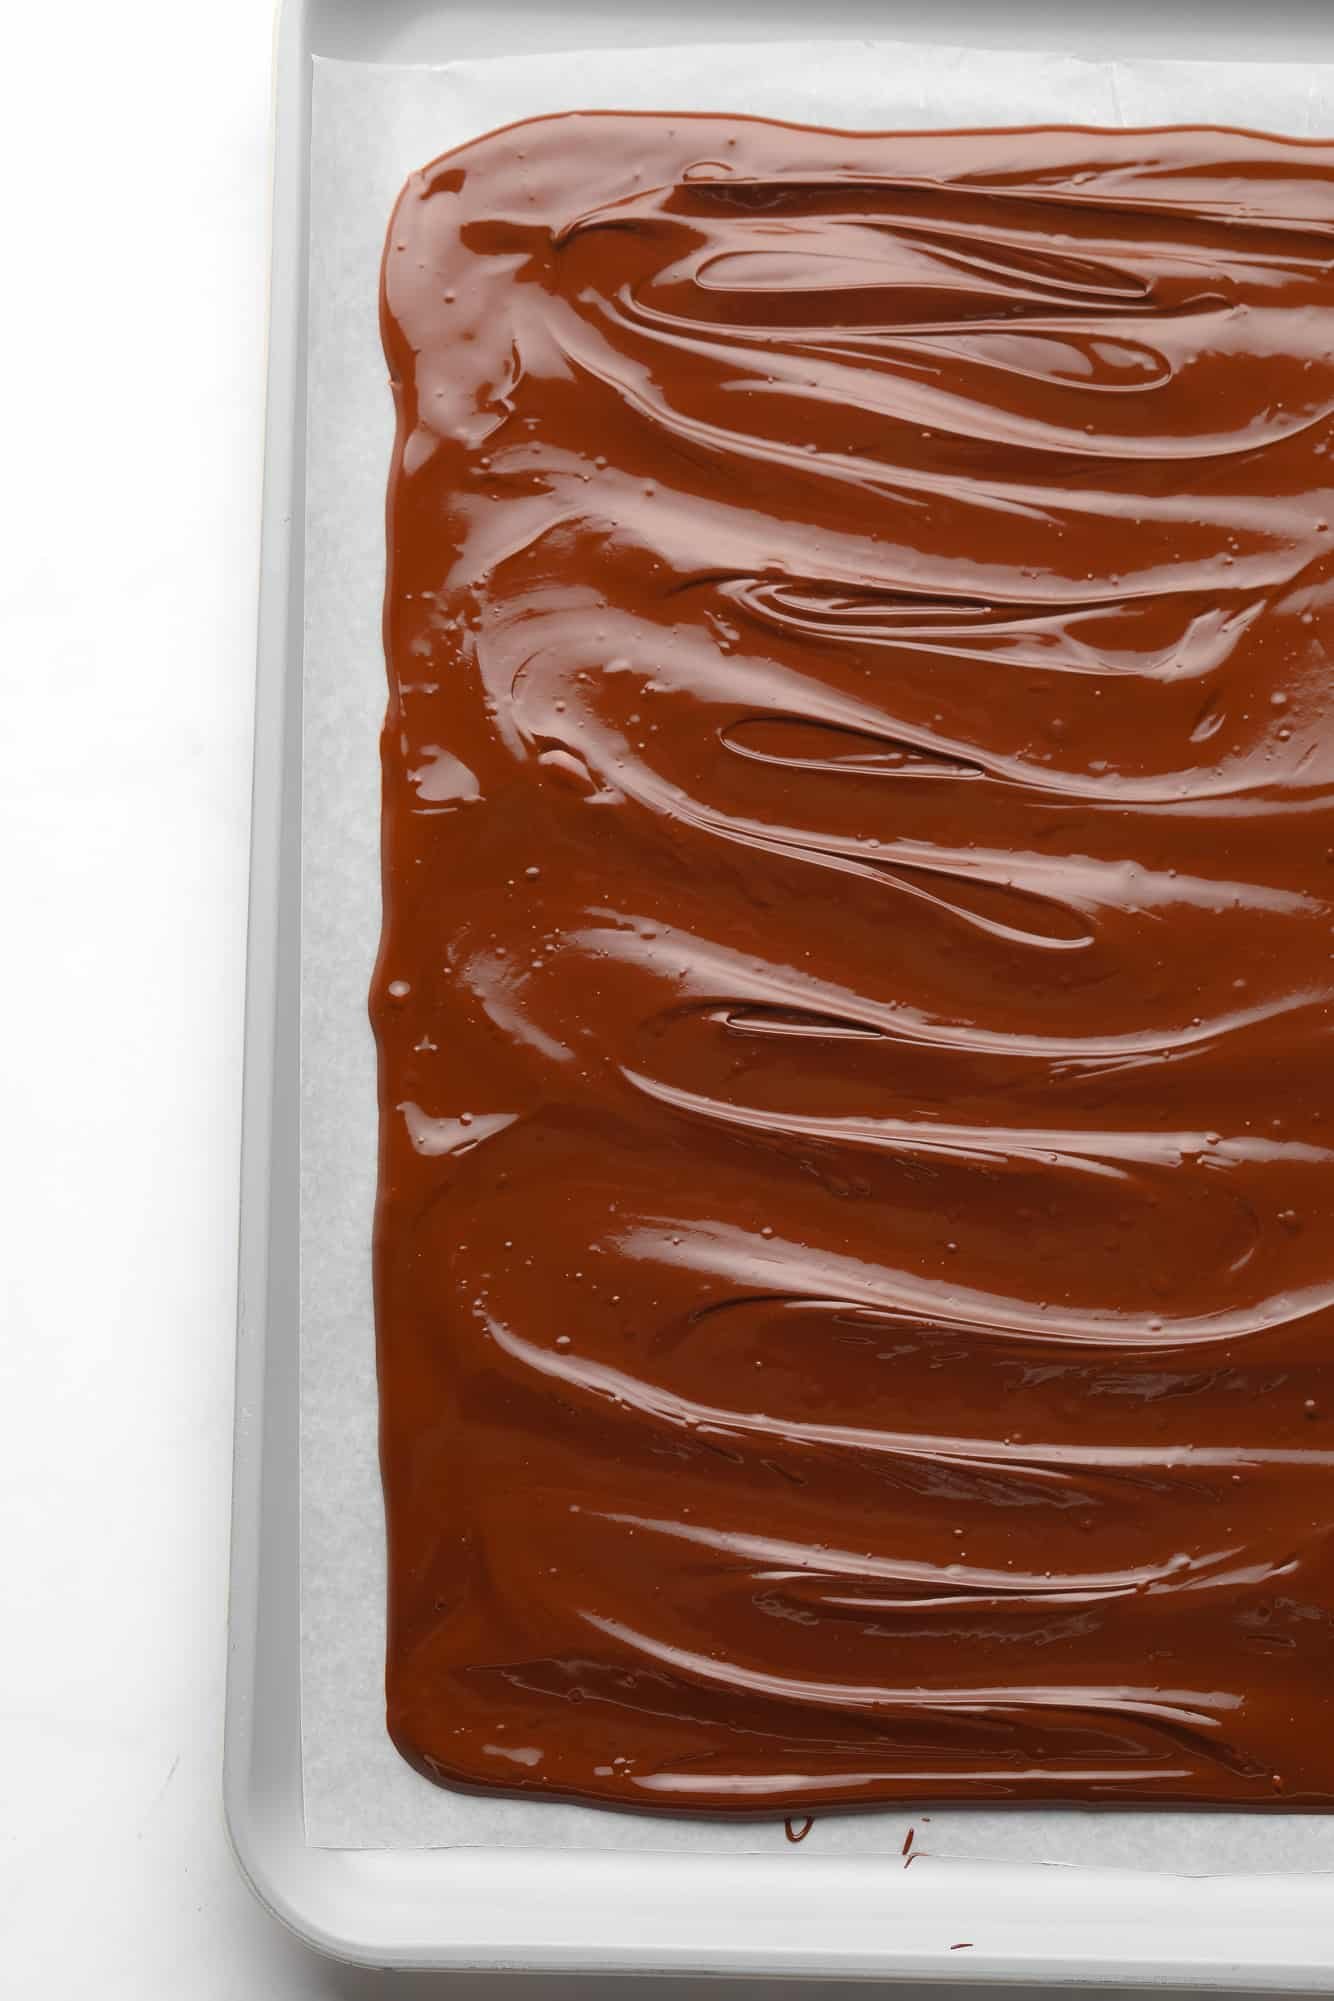 melted chocolate spread into a rectangle on a parchment-lined baking sheet.